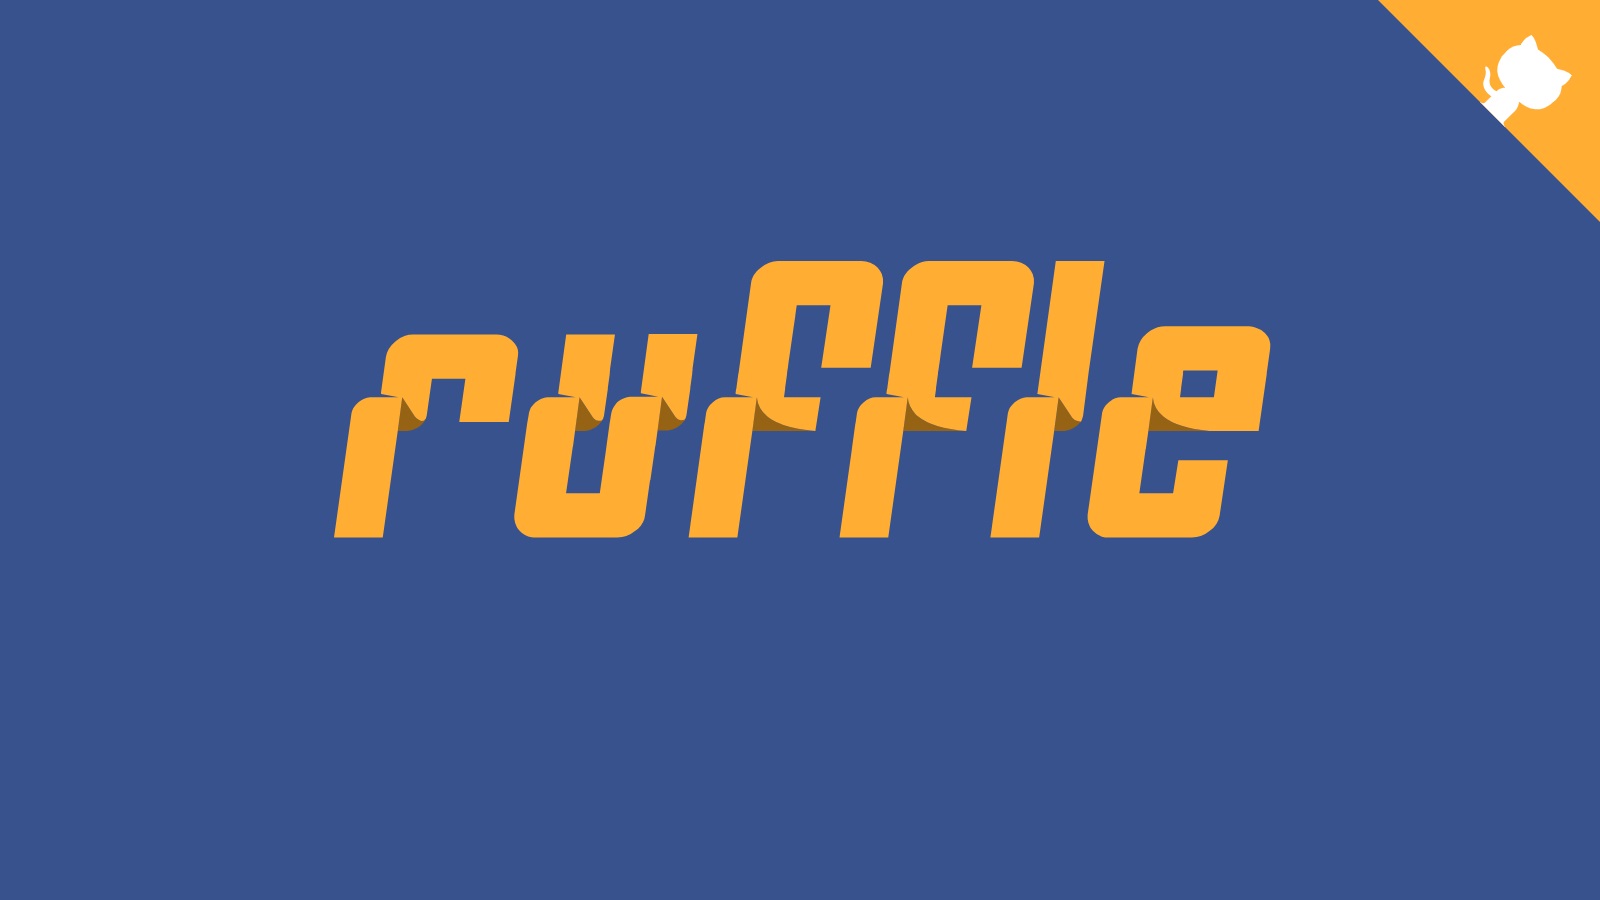 Ruffle is a Flash player emulator for SWF files that supports different platforms and browsers.